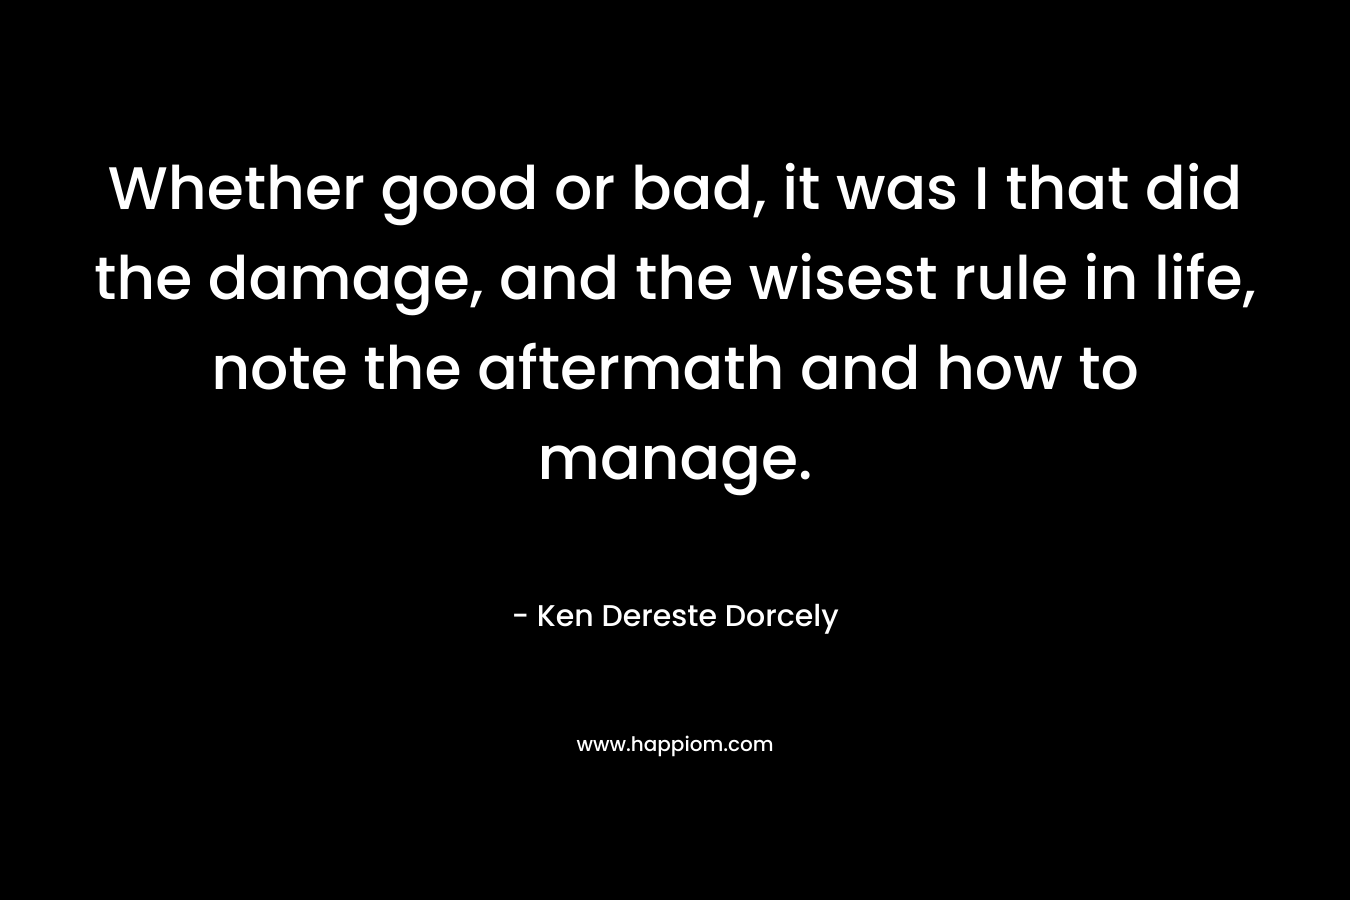 Whether good or bad, it was I that did the damage, and the wisest rule in life, note the aftermath and how to manage. – Ken Dereste Dorcely